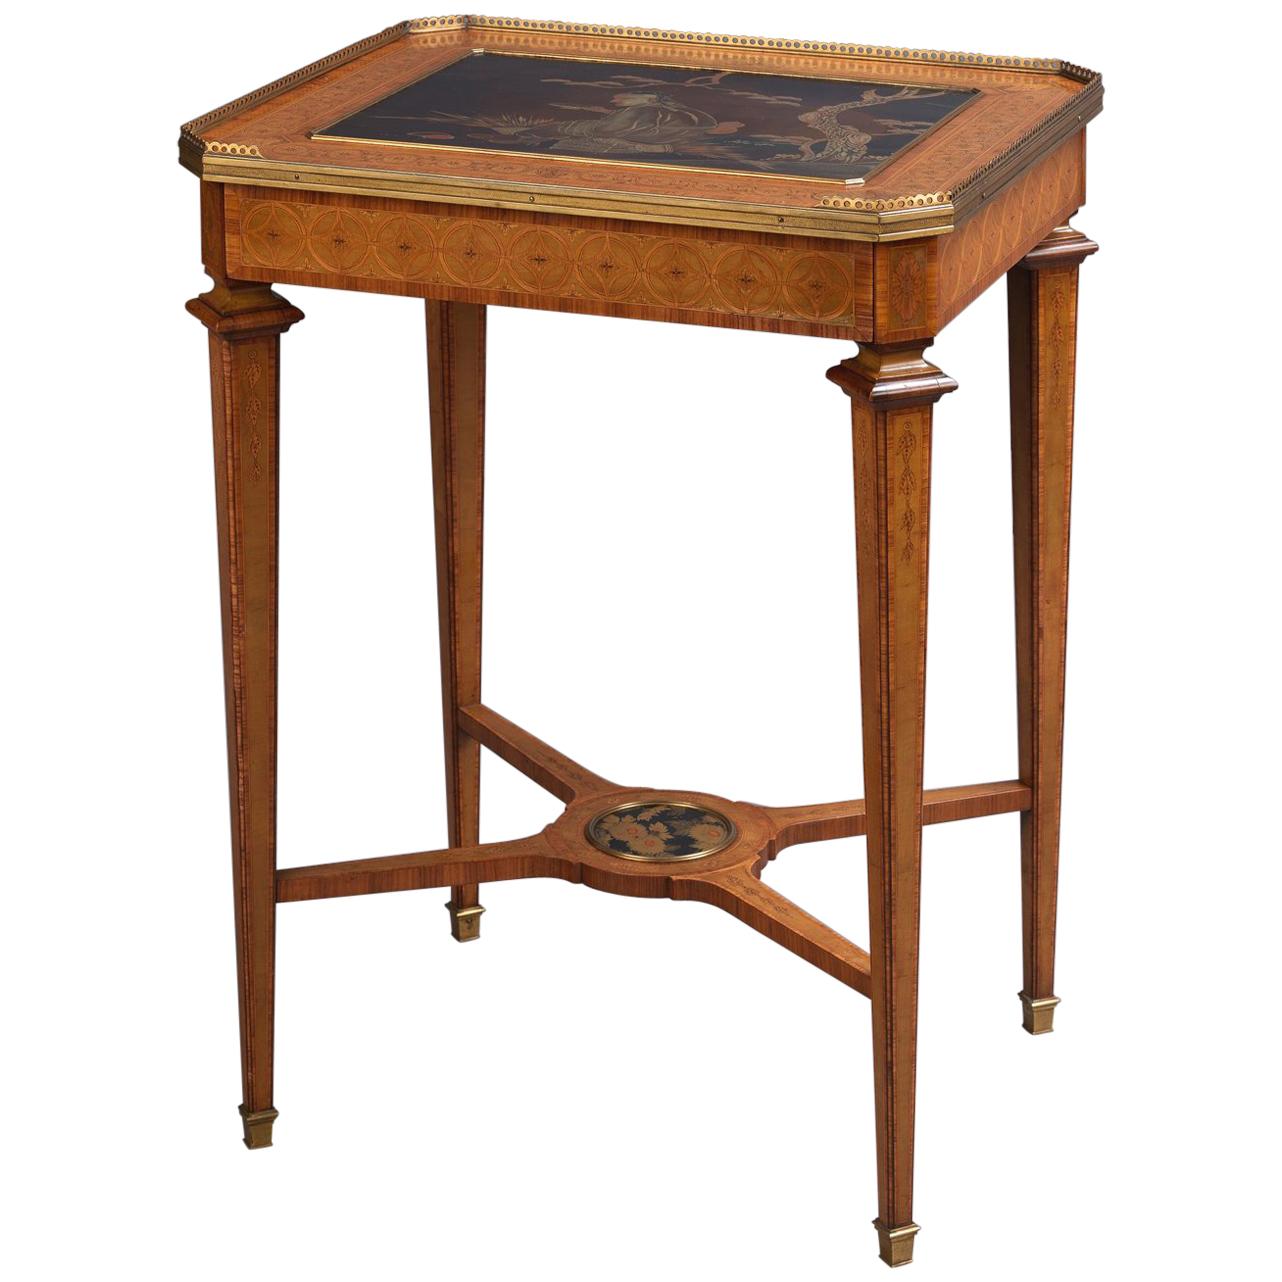 Marquetry Inlaid Table with a Lacquer Top Retailed by Boin Taburet, circa 1880